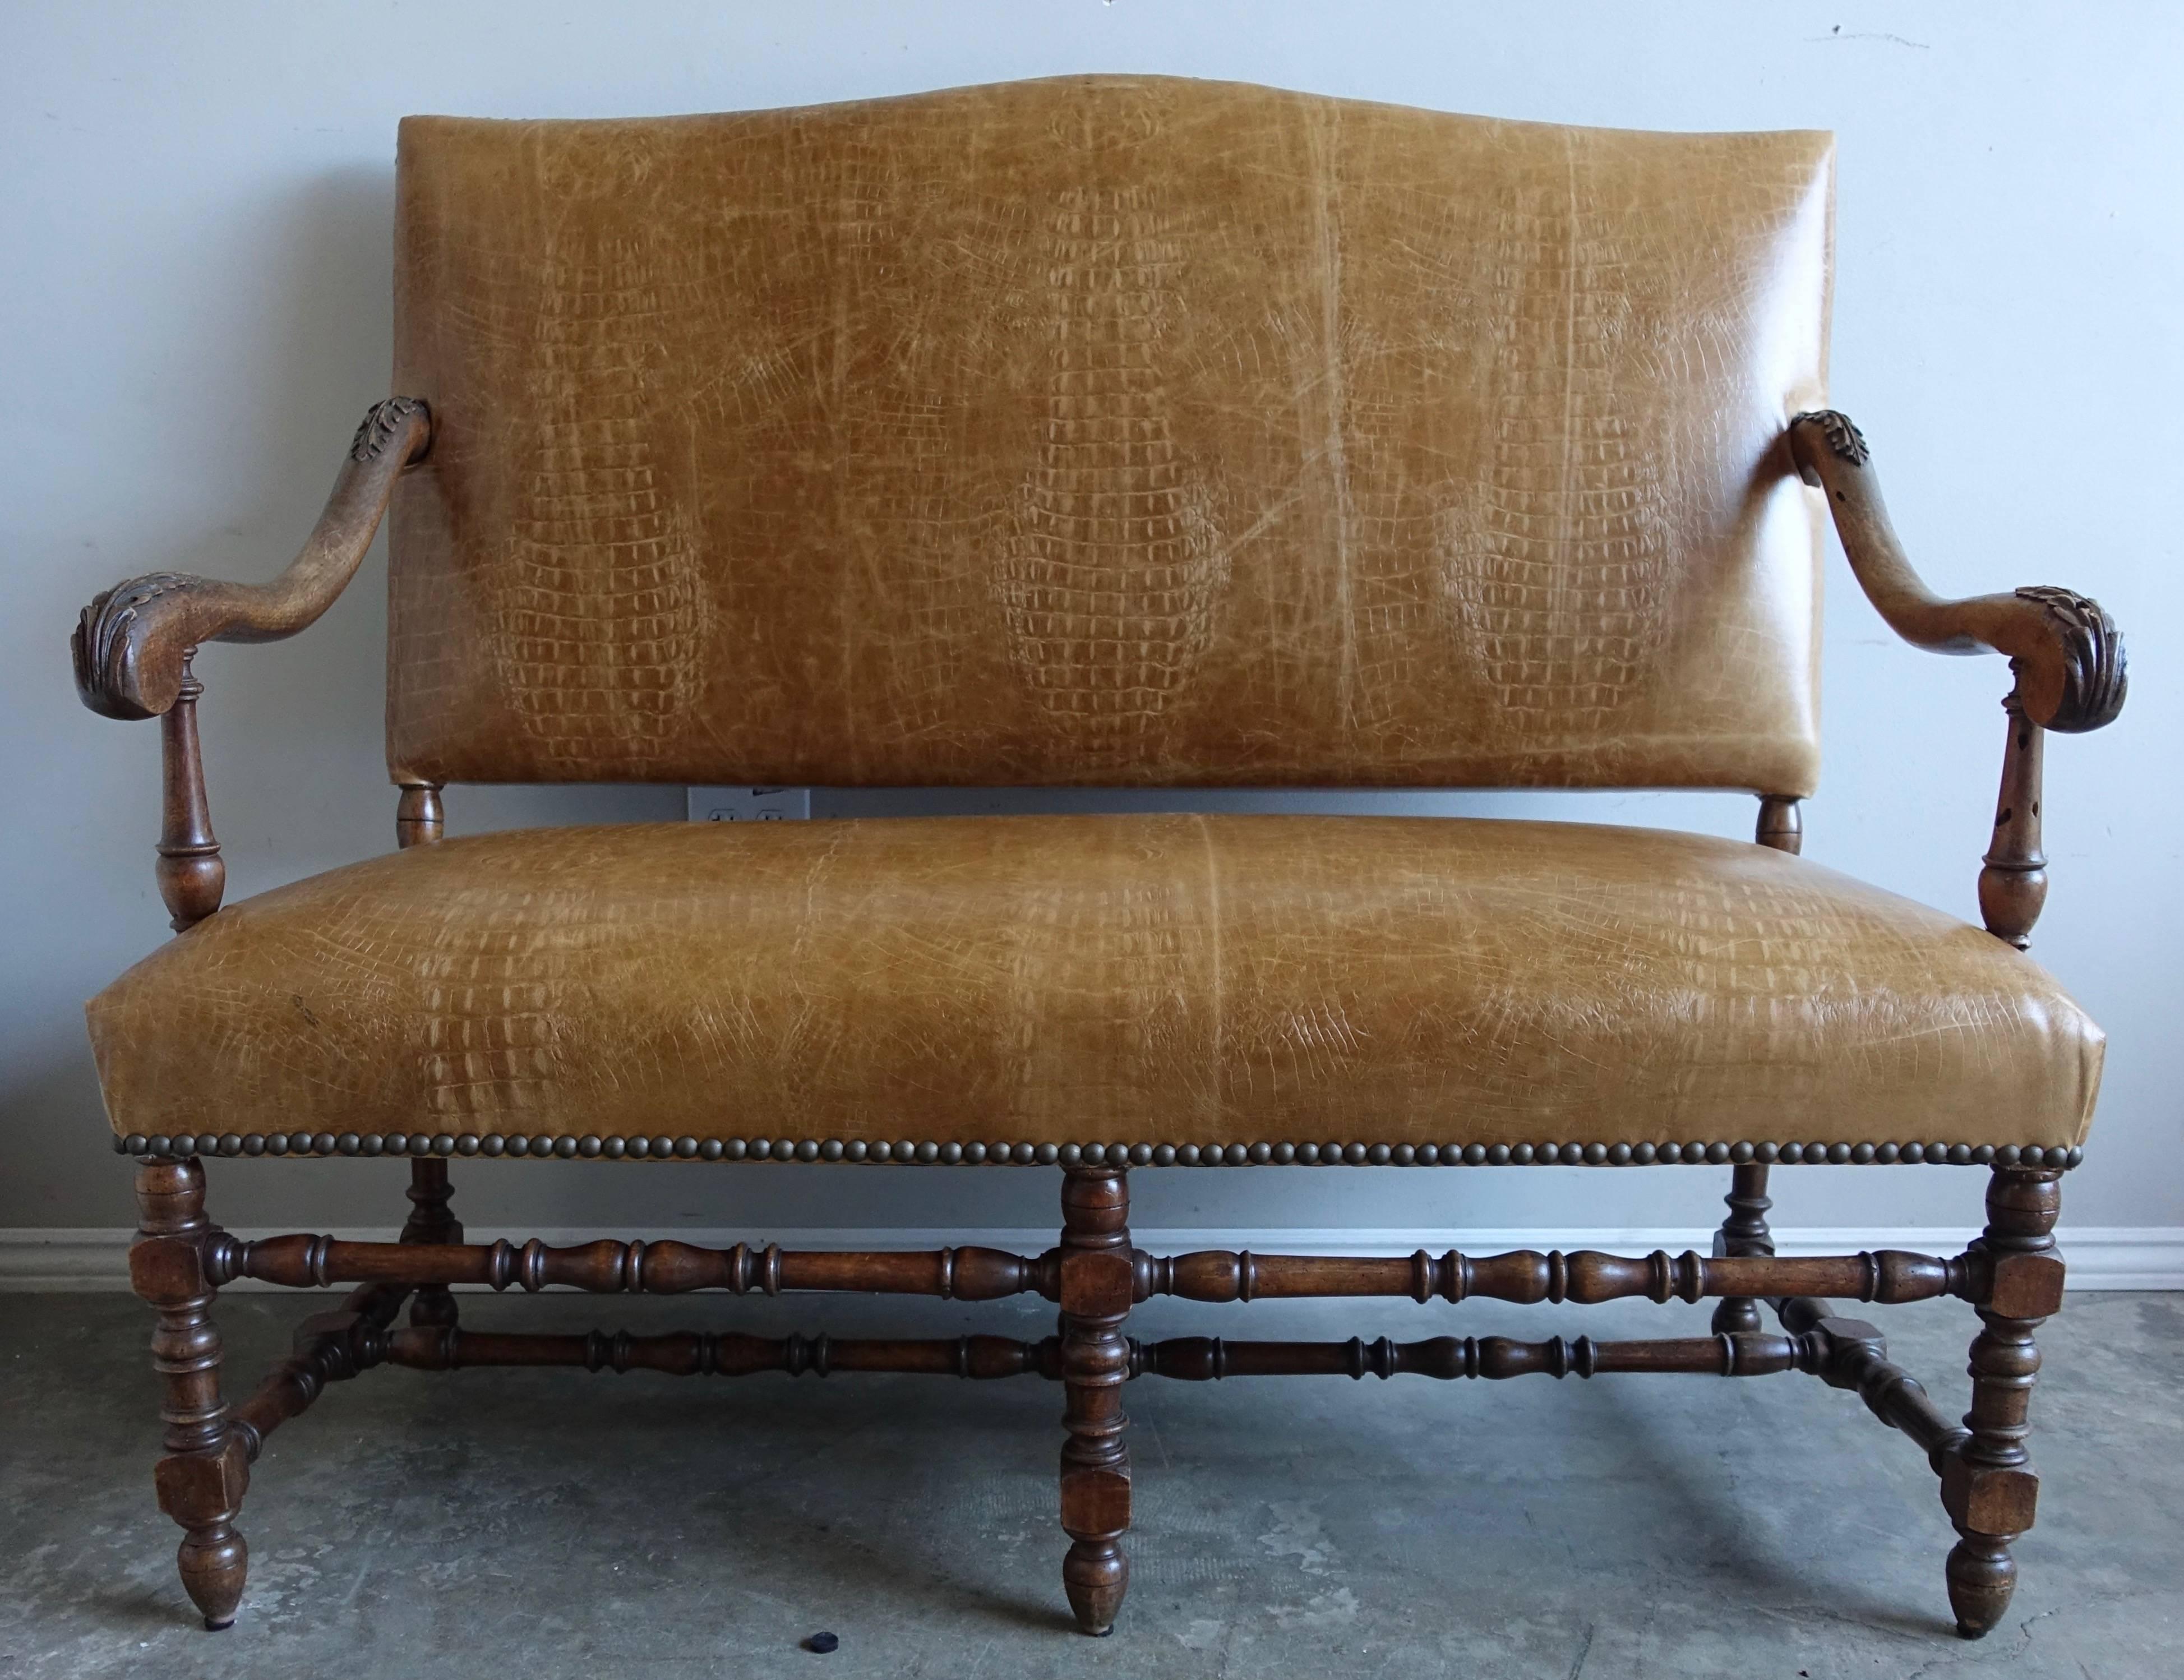 19th century English walnut embossed leather bench with nailhead trim detail. The bench stands on six turned legs connected by a bottom stretcher.